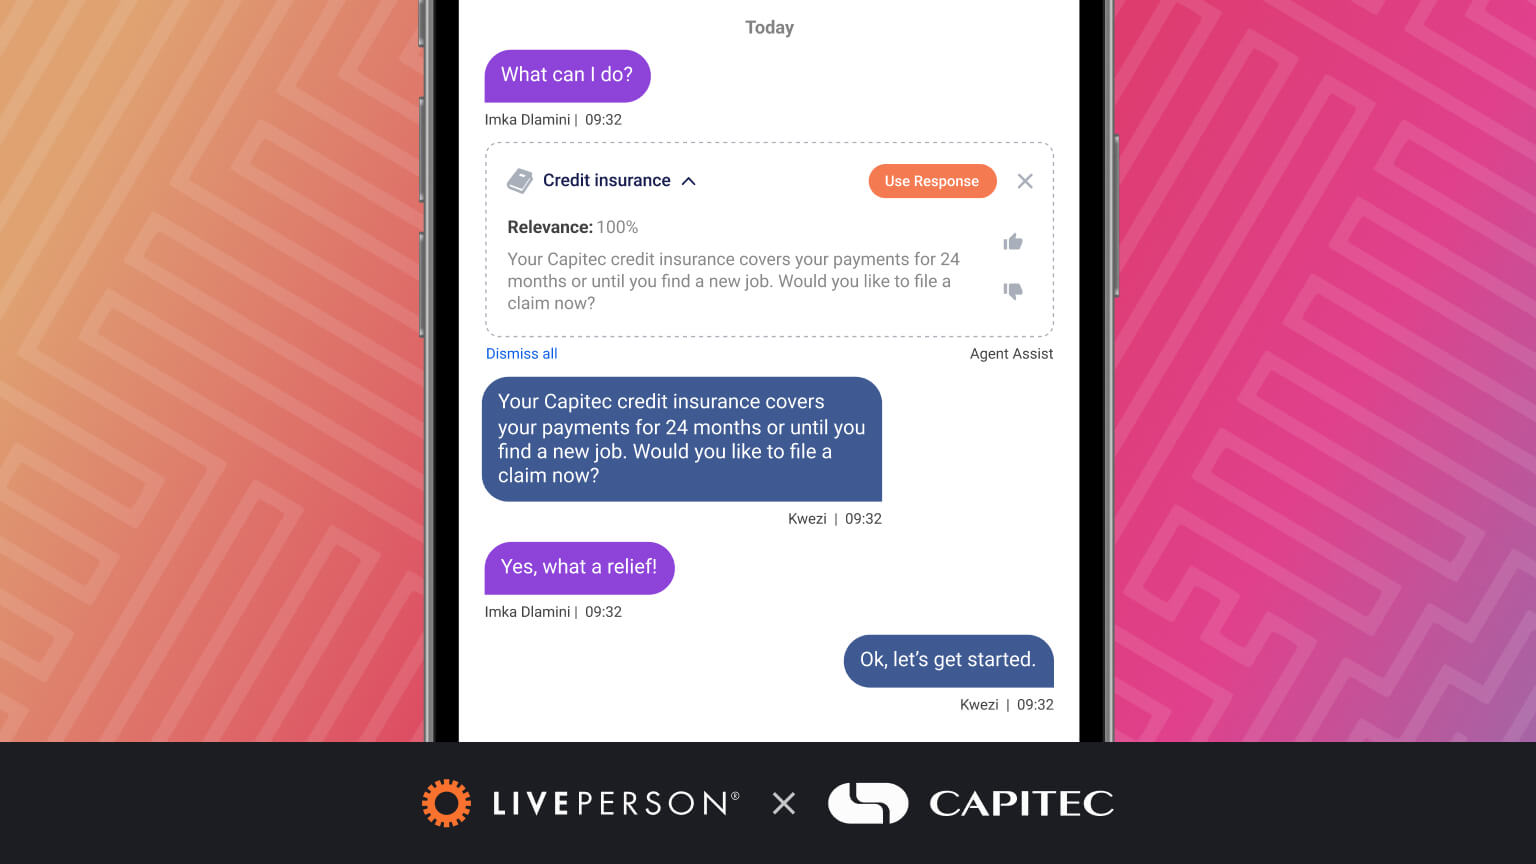 Example of Capitec conversational banking interaction, illustrating the future of banking business models and how it can potentially increase customer loyalty